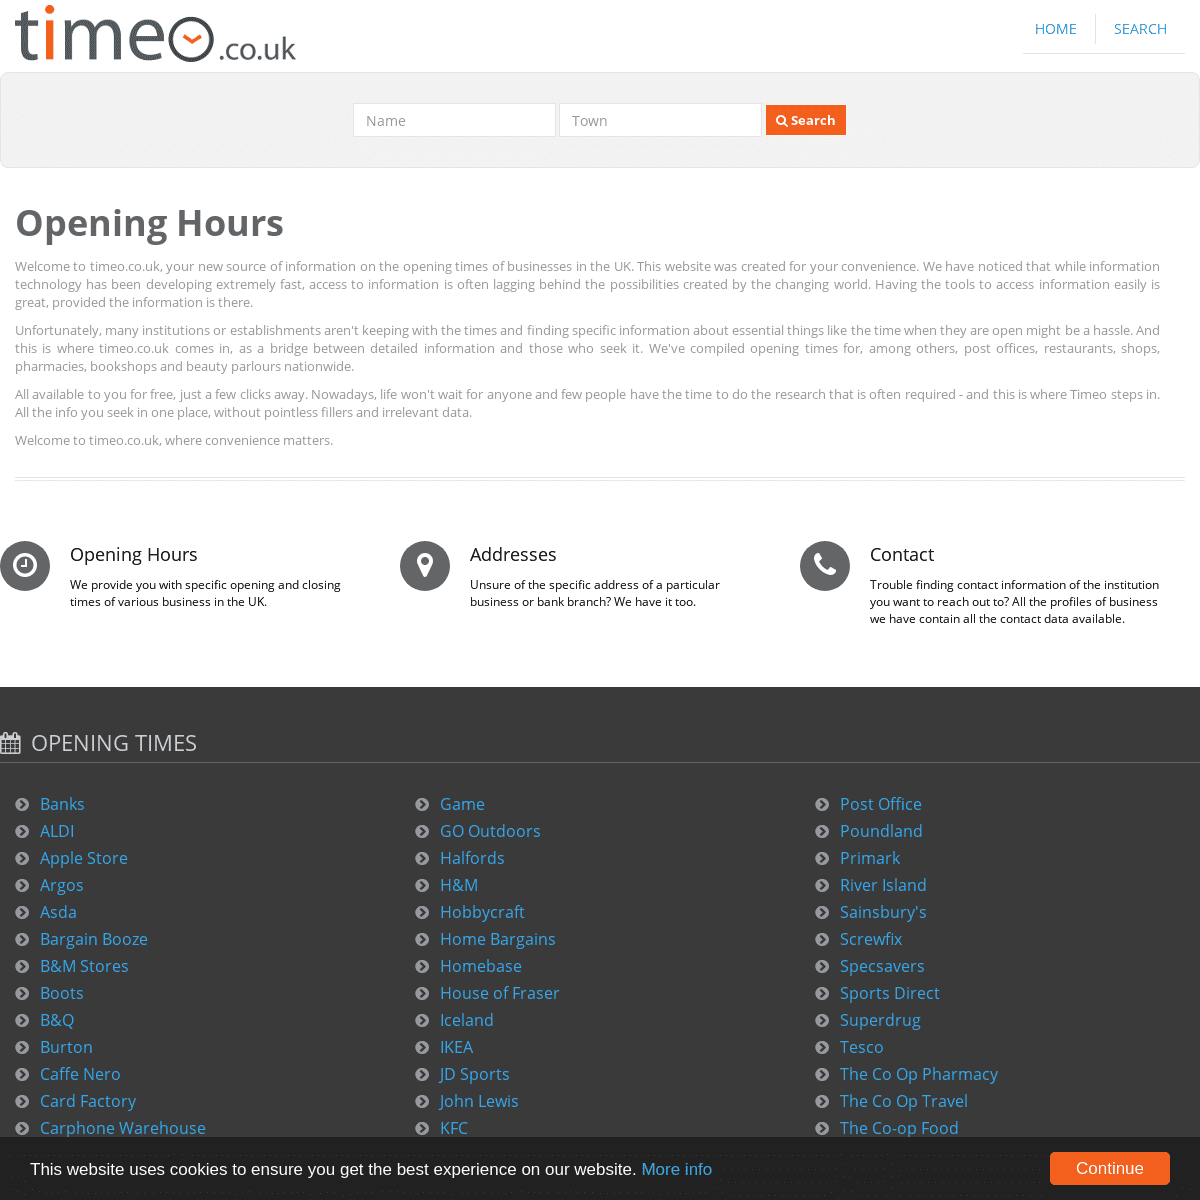 A complete backup of timeo.co.uk